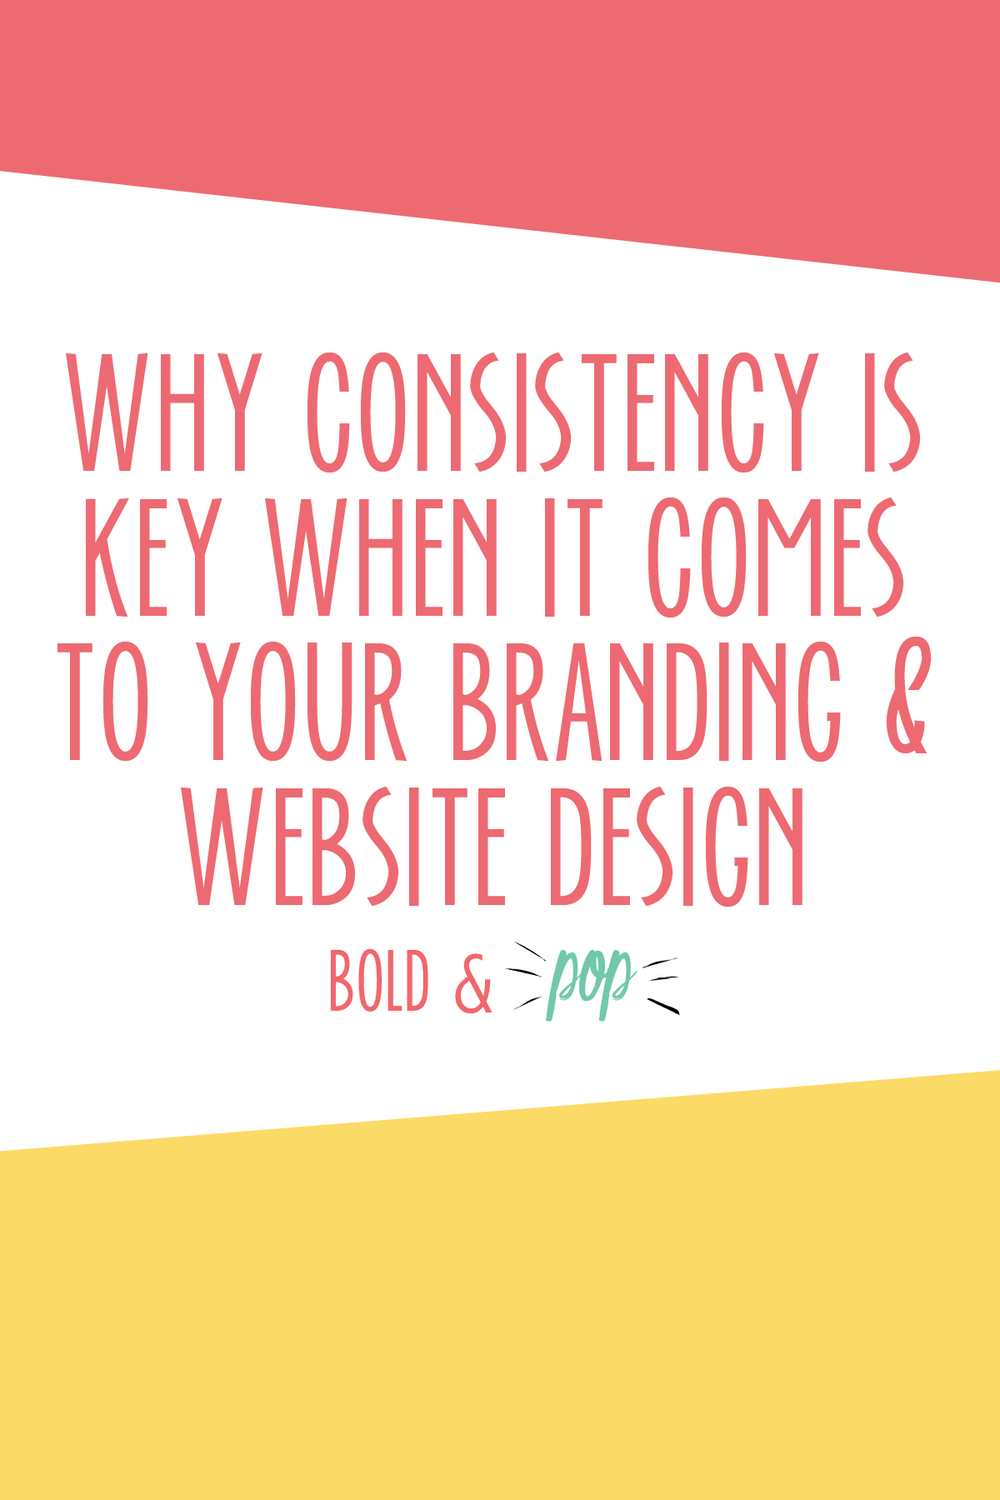 Why Consistency is Key When it Comes to Your Branding and Website Design